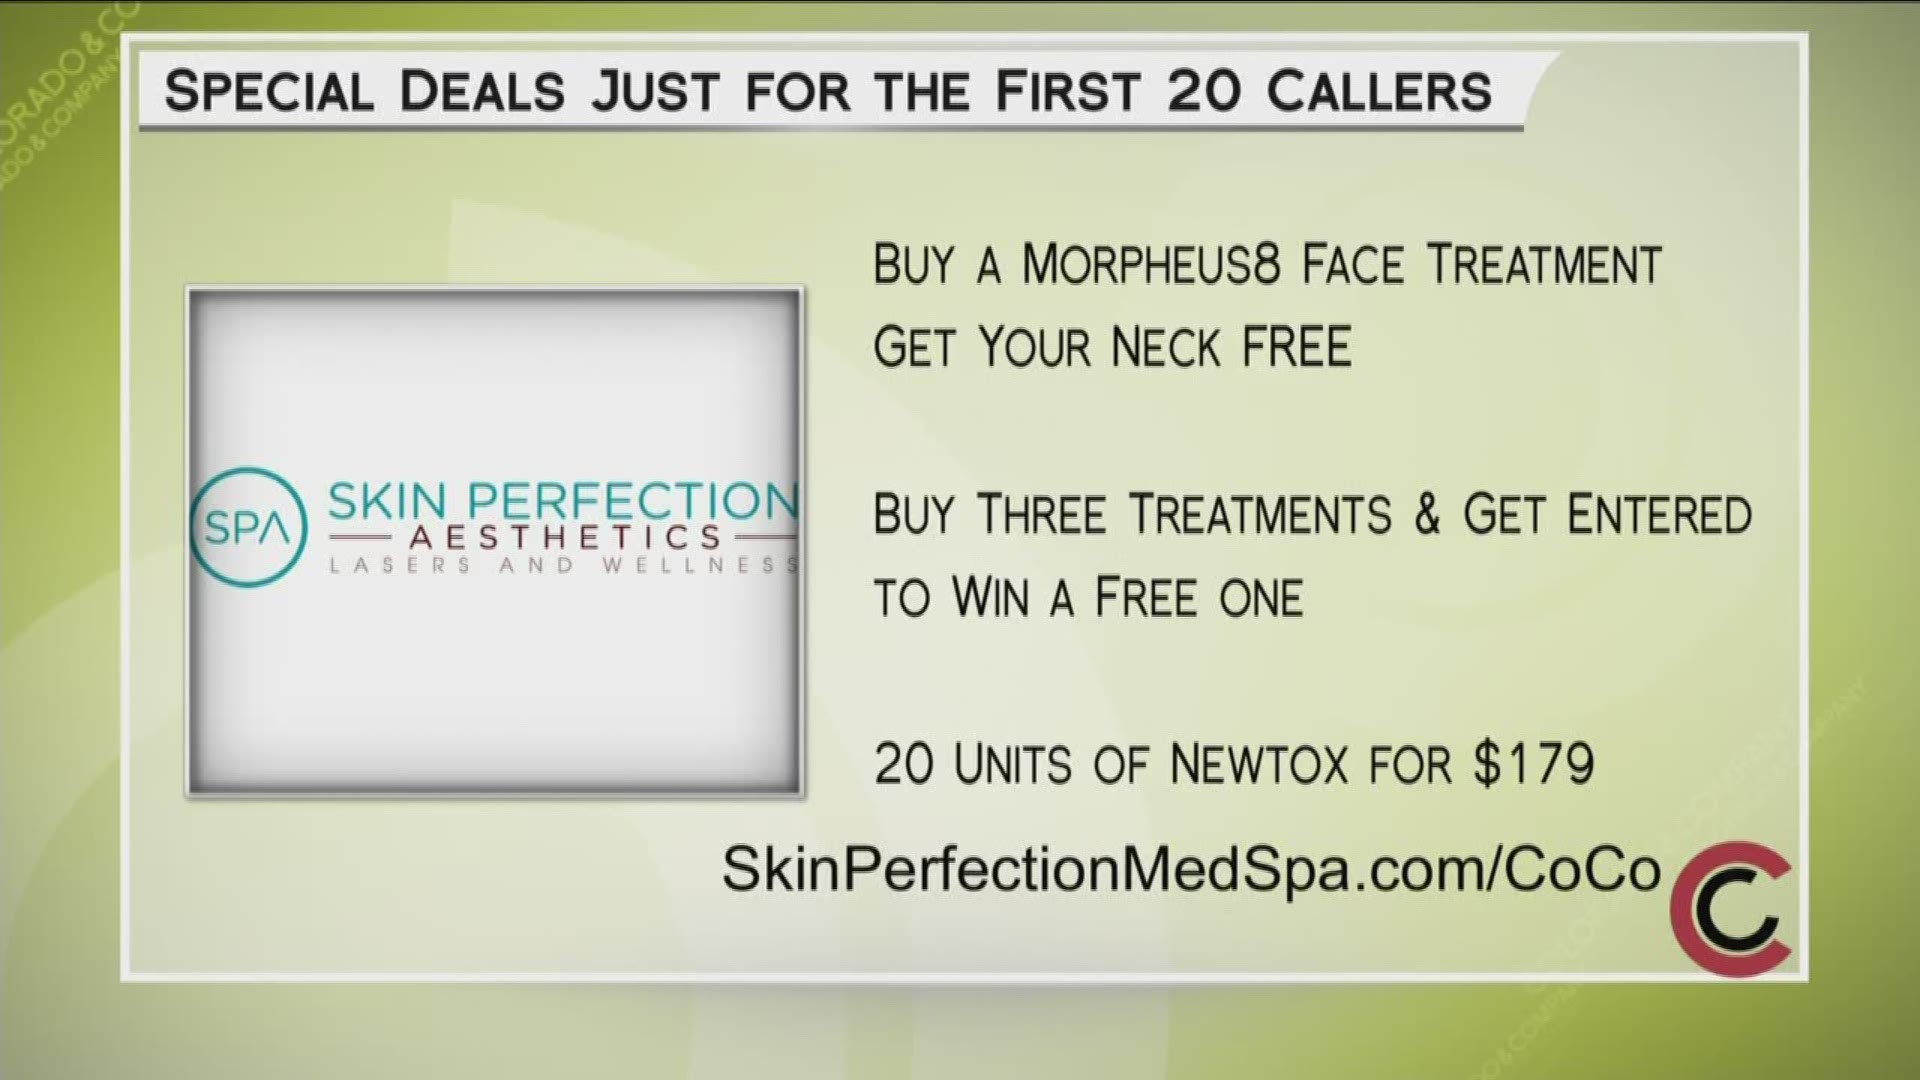 Skin Perfection Aesthetics can help you look the way you feel you should. Check out all of their specials at www.SkinPerfectionMedSpa.com, or call 720.502.6168.